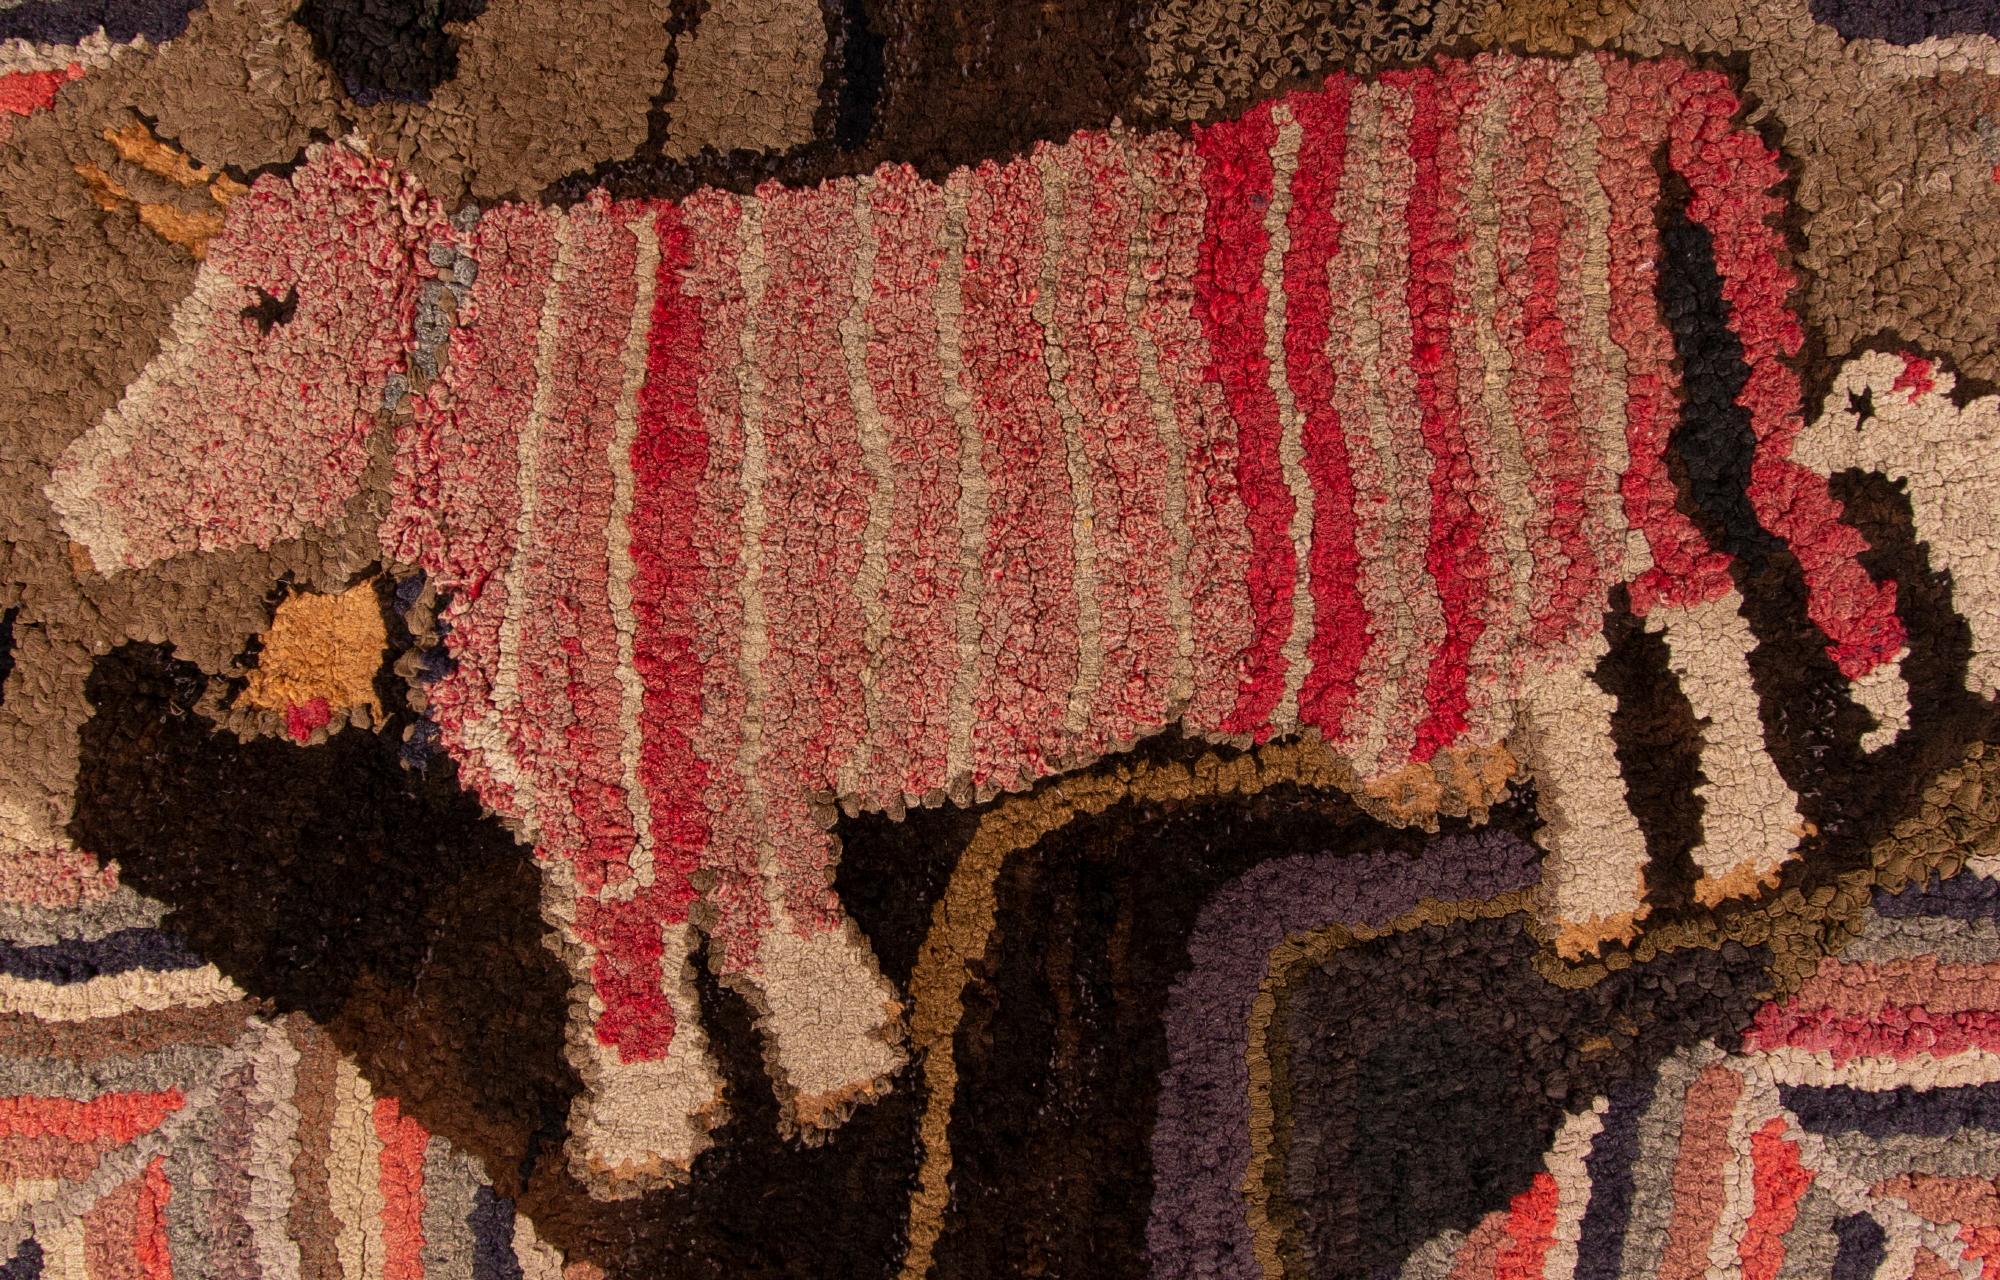 Whimsical Hooked rug with a pink striped cow and a little white dog, ca 1885-1910

Hooked rug with a pink striped cow, wearing a large cowbell, followed by a small white dog. With excellent folk style, these are canted at a downward angle within a